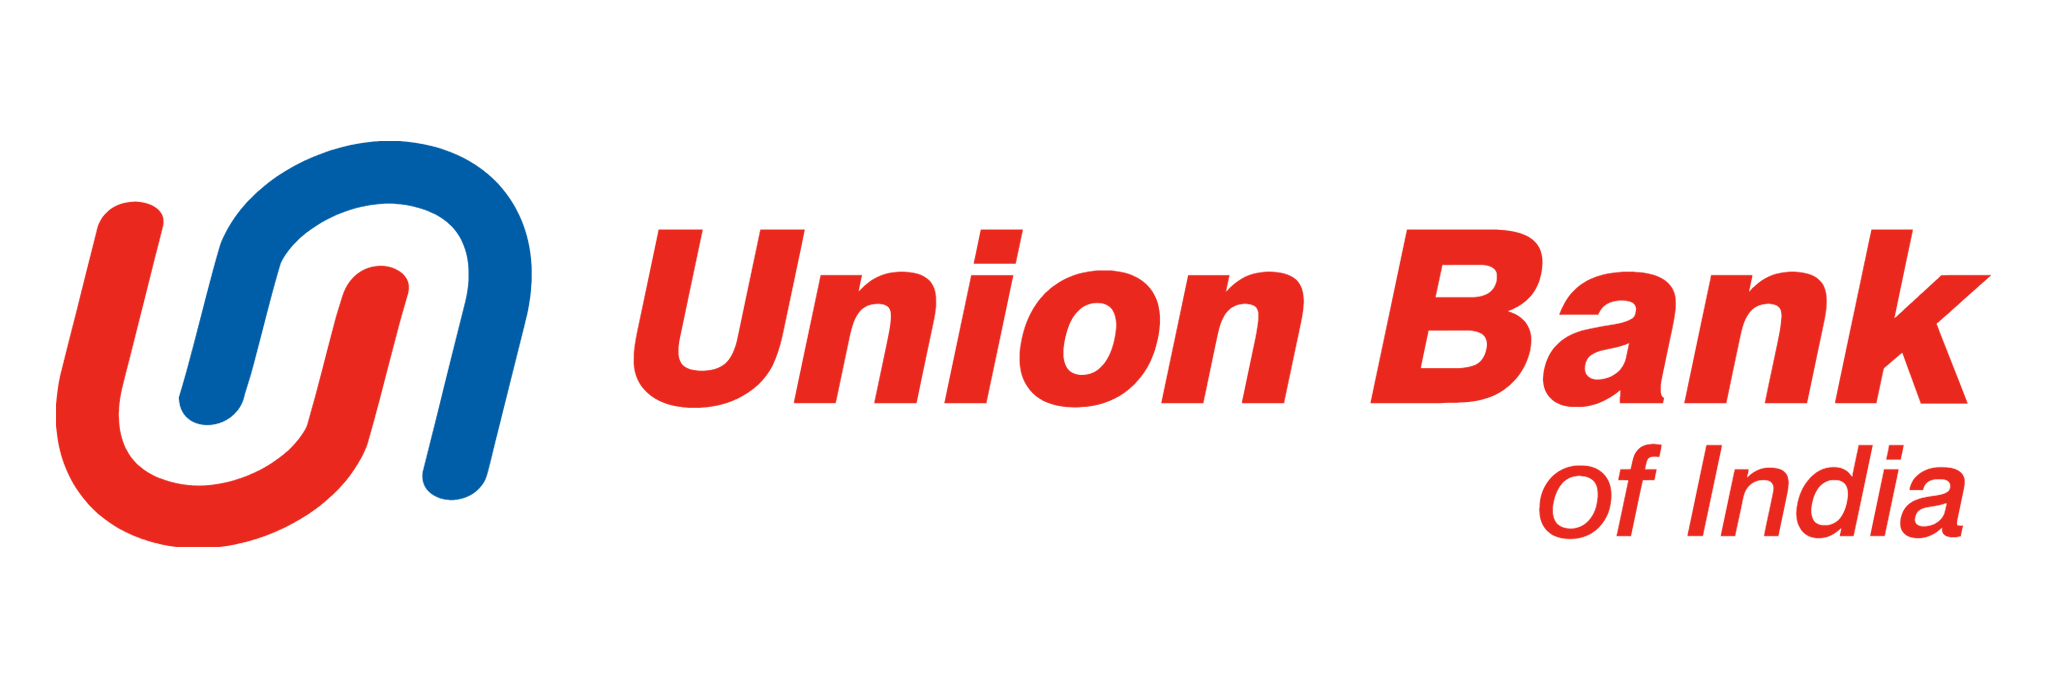 Union bank of india PNG.